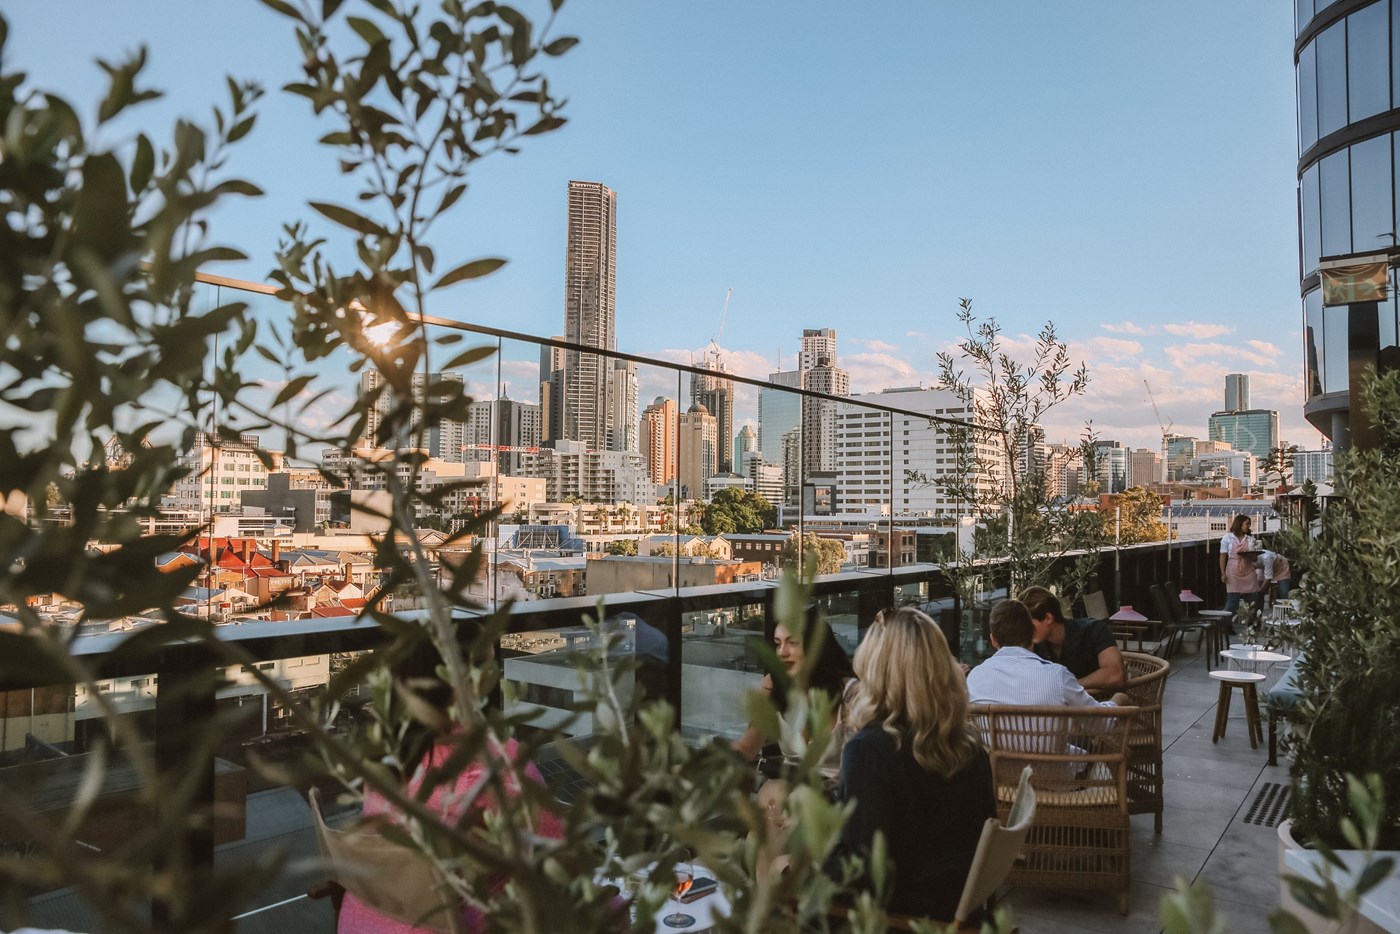 A shot of the exterior rooftop bar terrace with the Brisbane city skyline in the background.